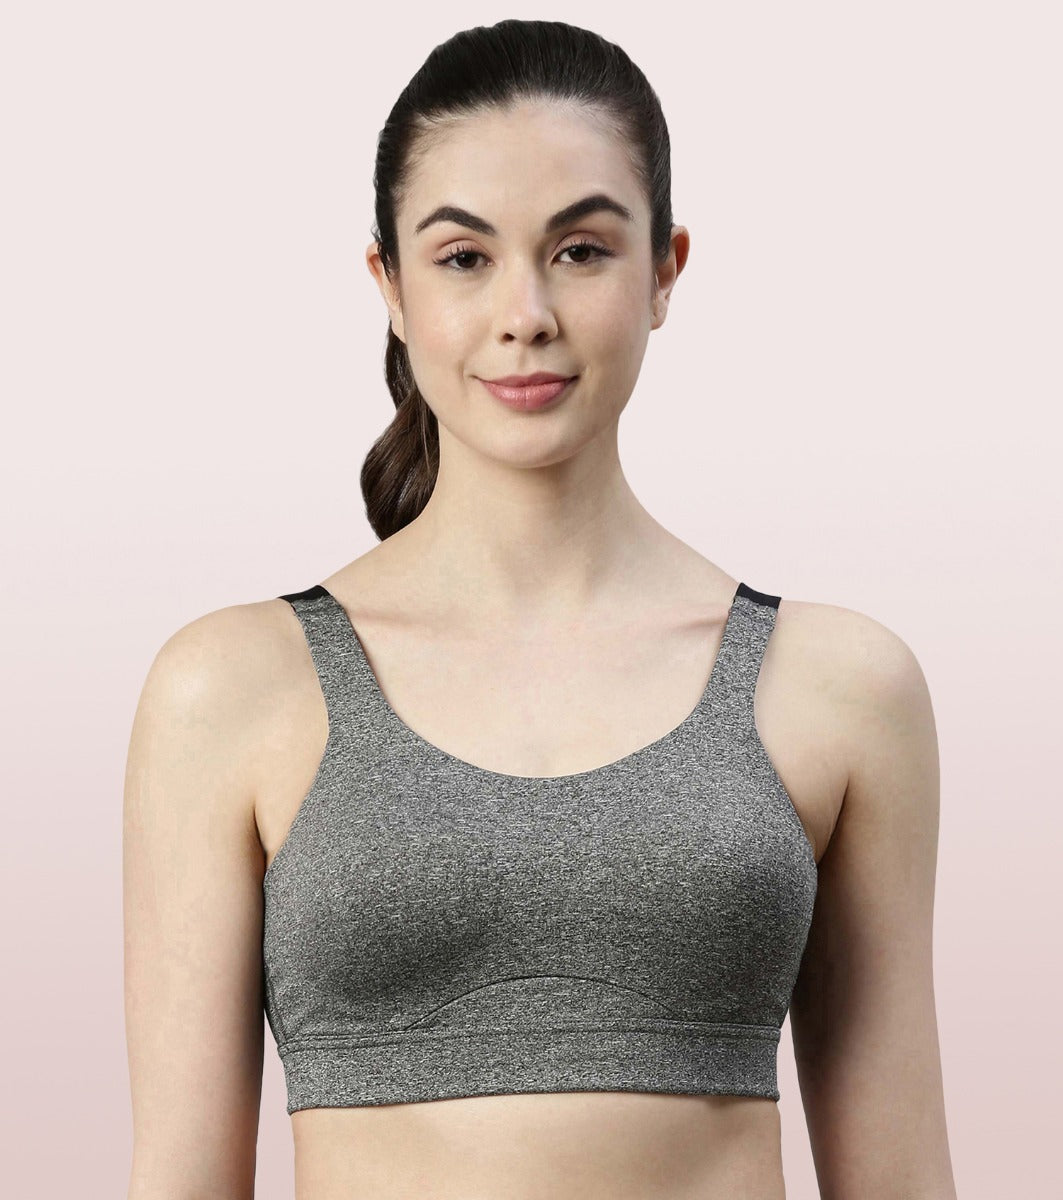 Enamor Agion SB18 Convertible Back High-Impact Sports Bra for Women- Full Coverage, Padded and Wirefree - Grey Melange